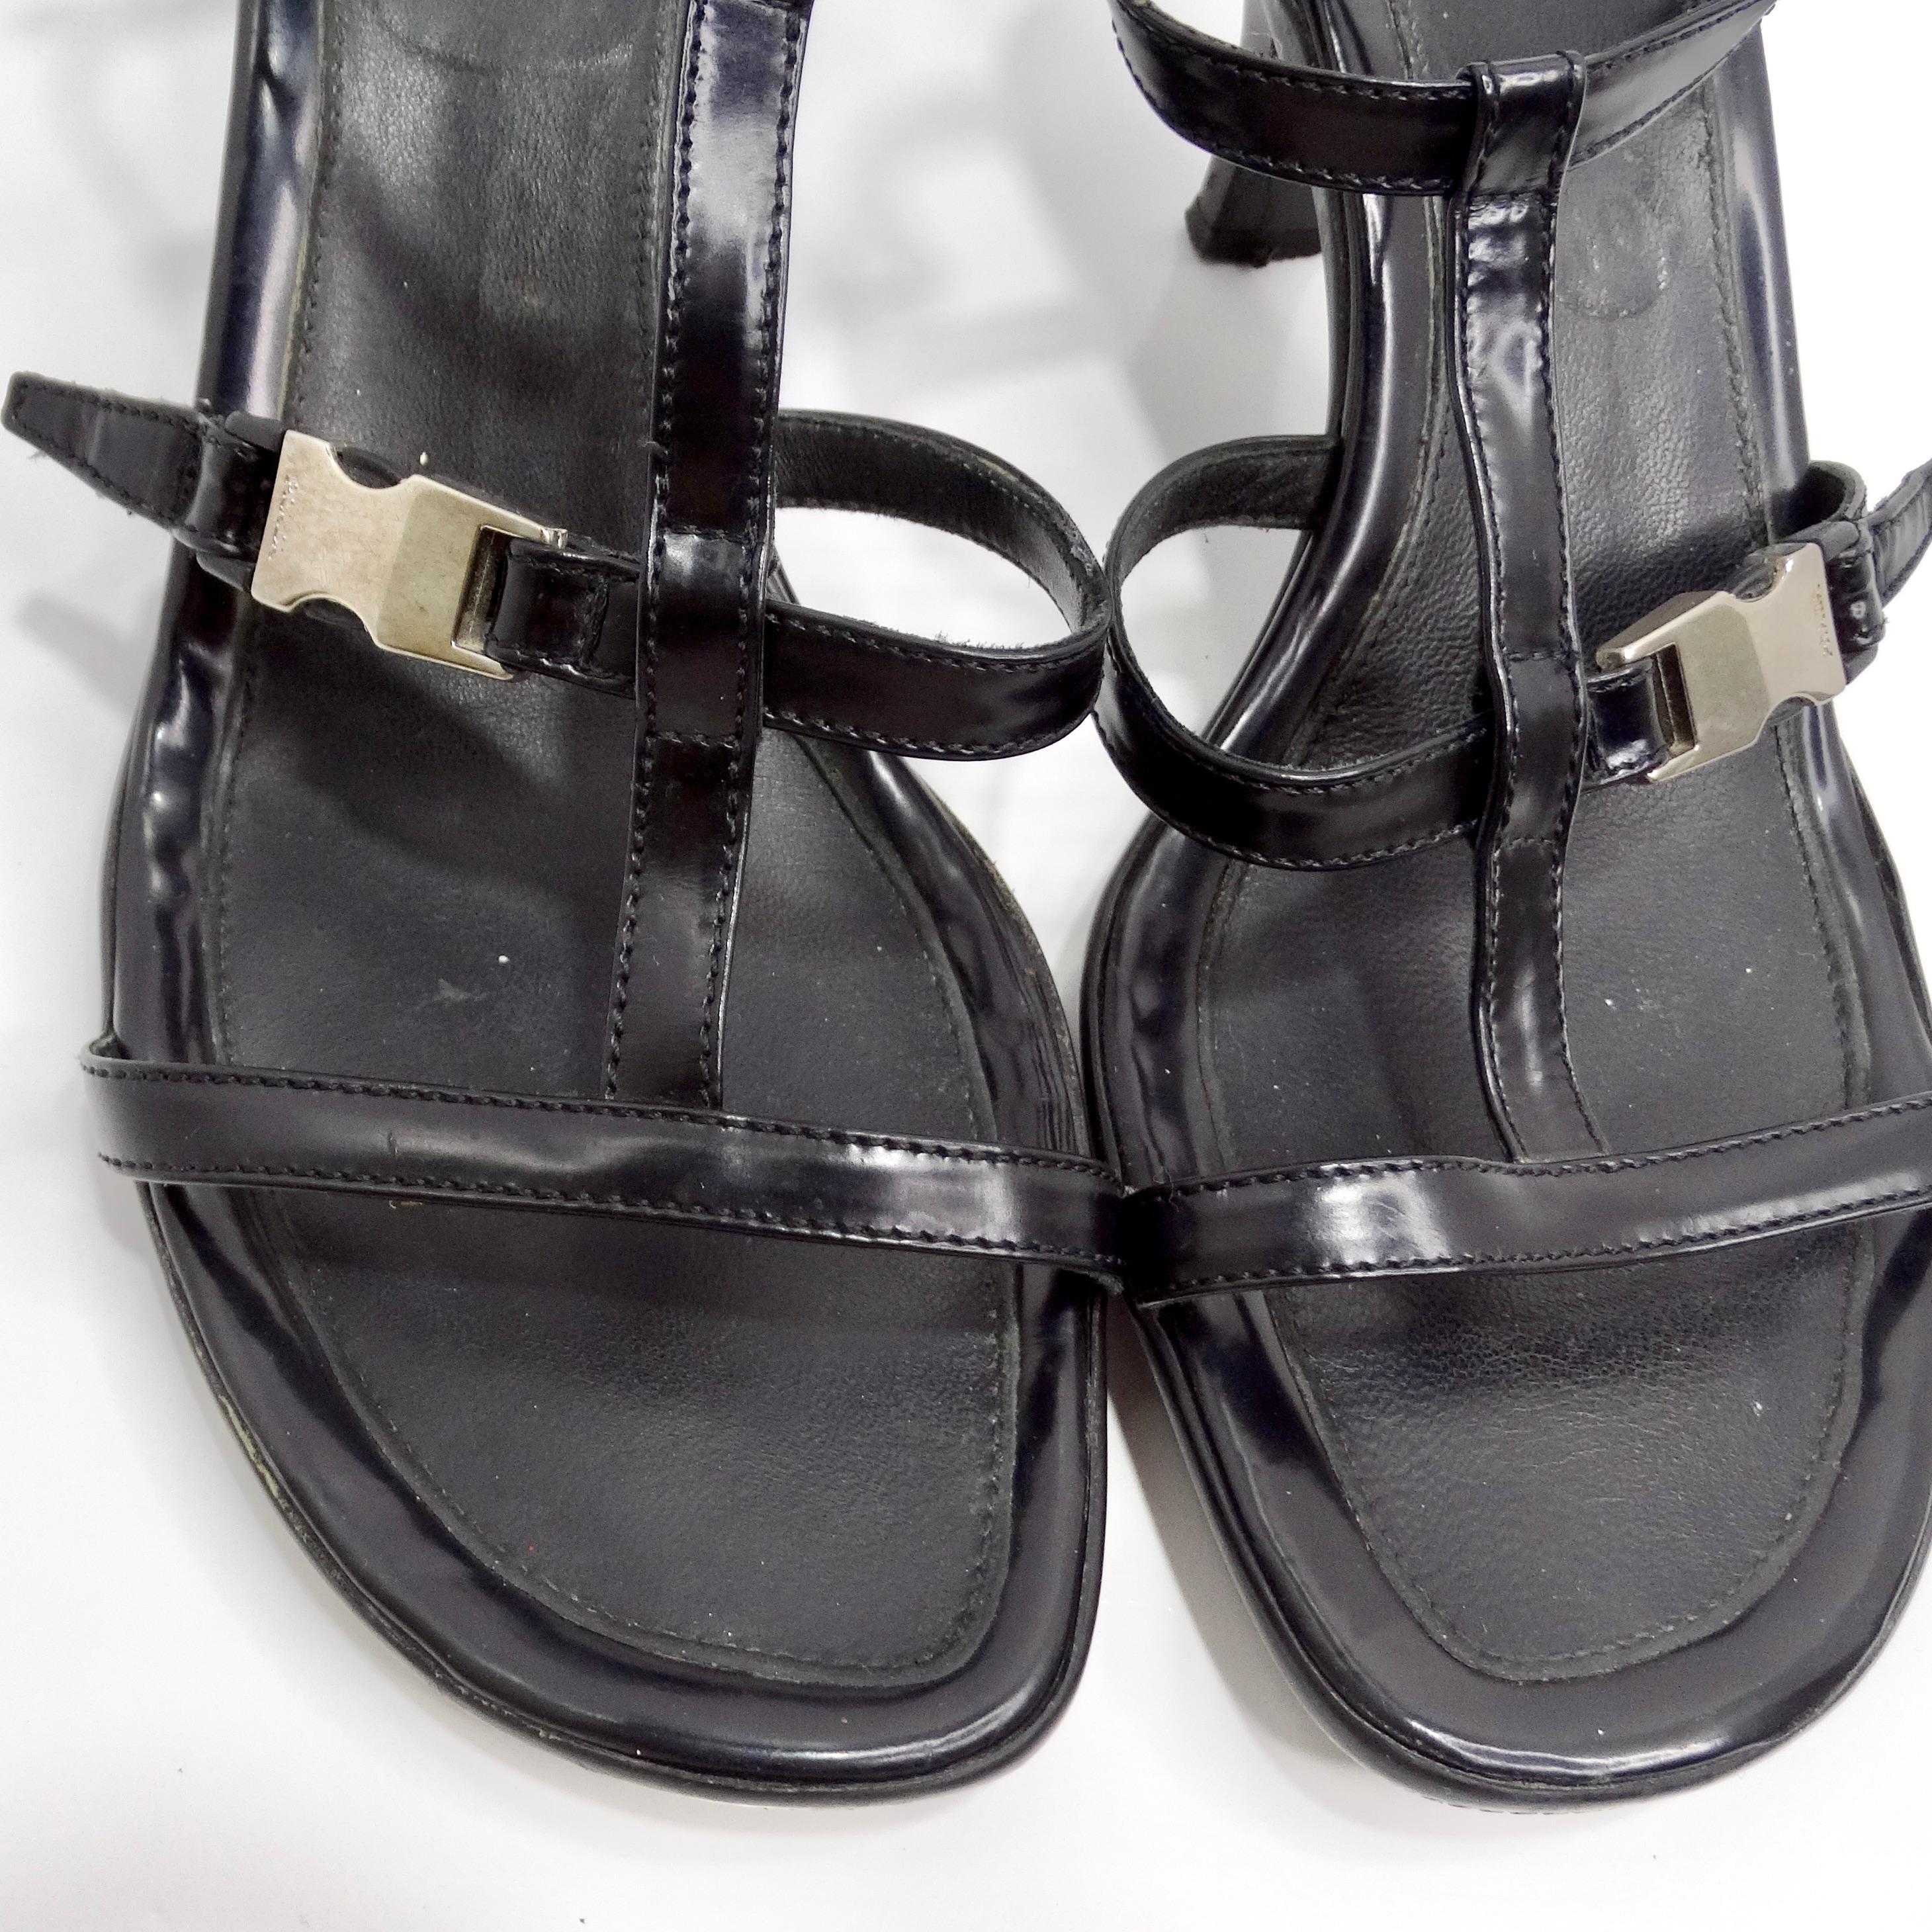 Introducing the timeless elegance of the Prada Vintage Black Leather Strappy Buckle Kitten Heels, a chic and versatile footwear option perfect for any occasion. Crafted from luxurious black leather, these sandals feature a striking multi-strap